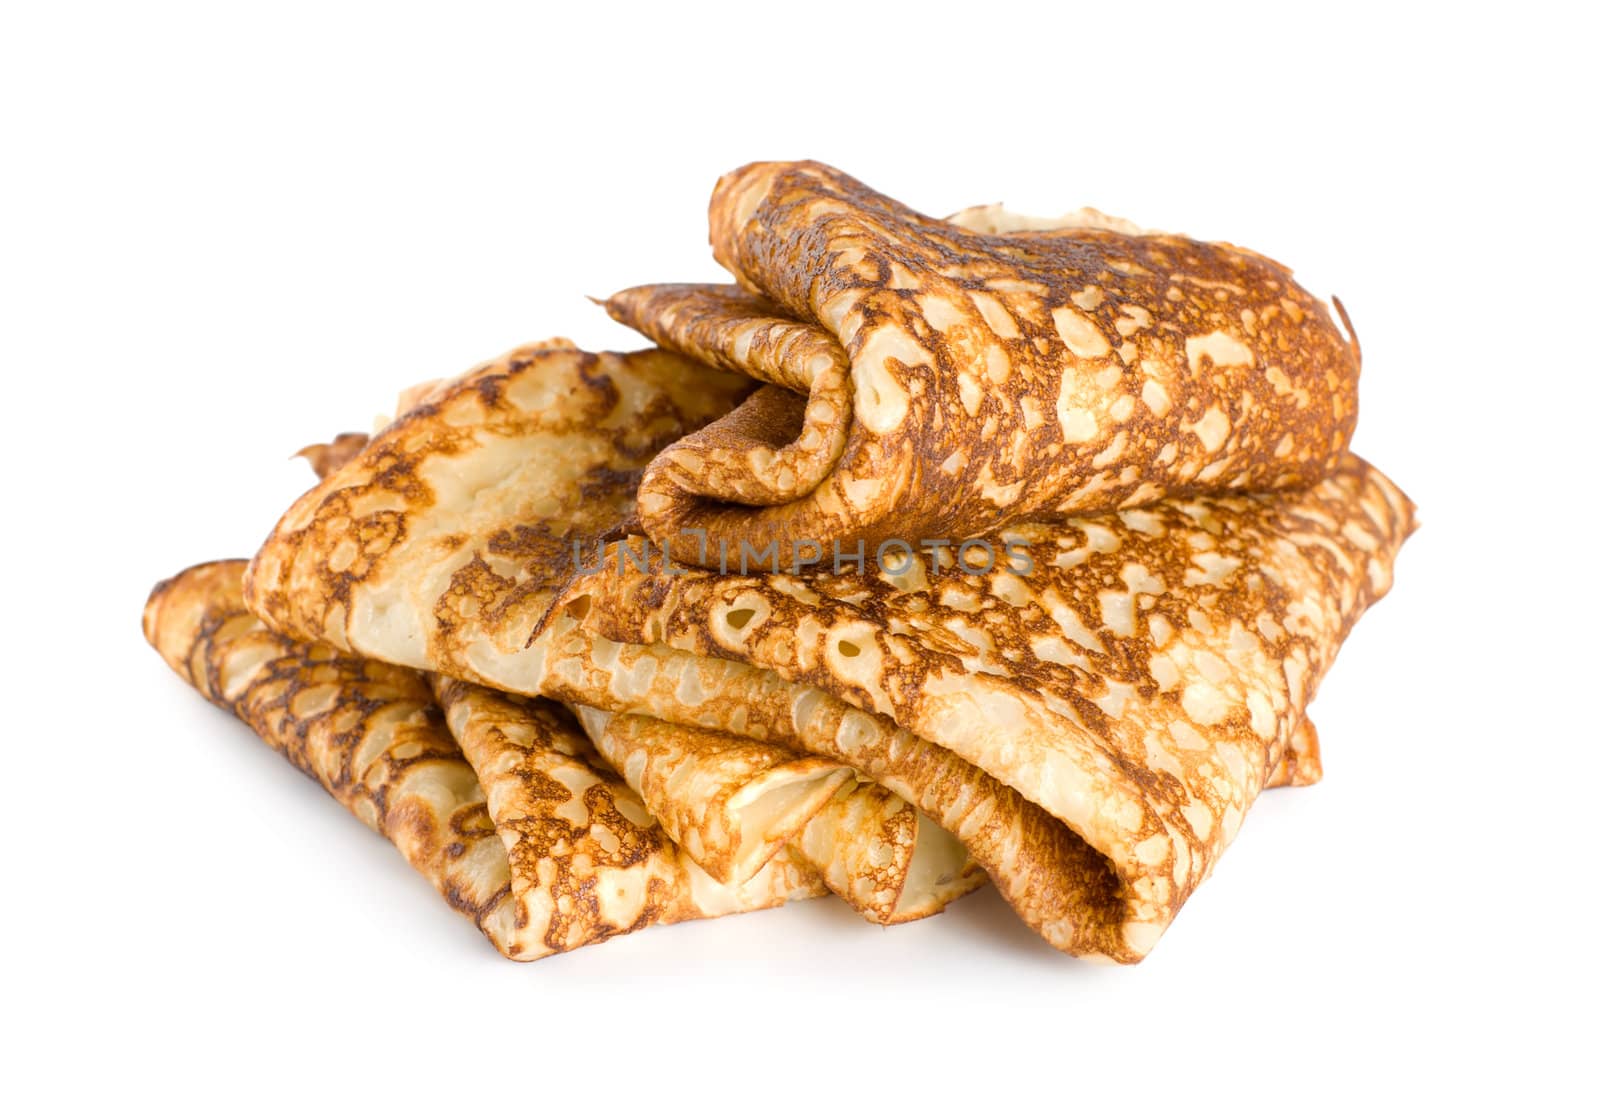 Folded pancakes by Givaga